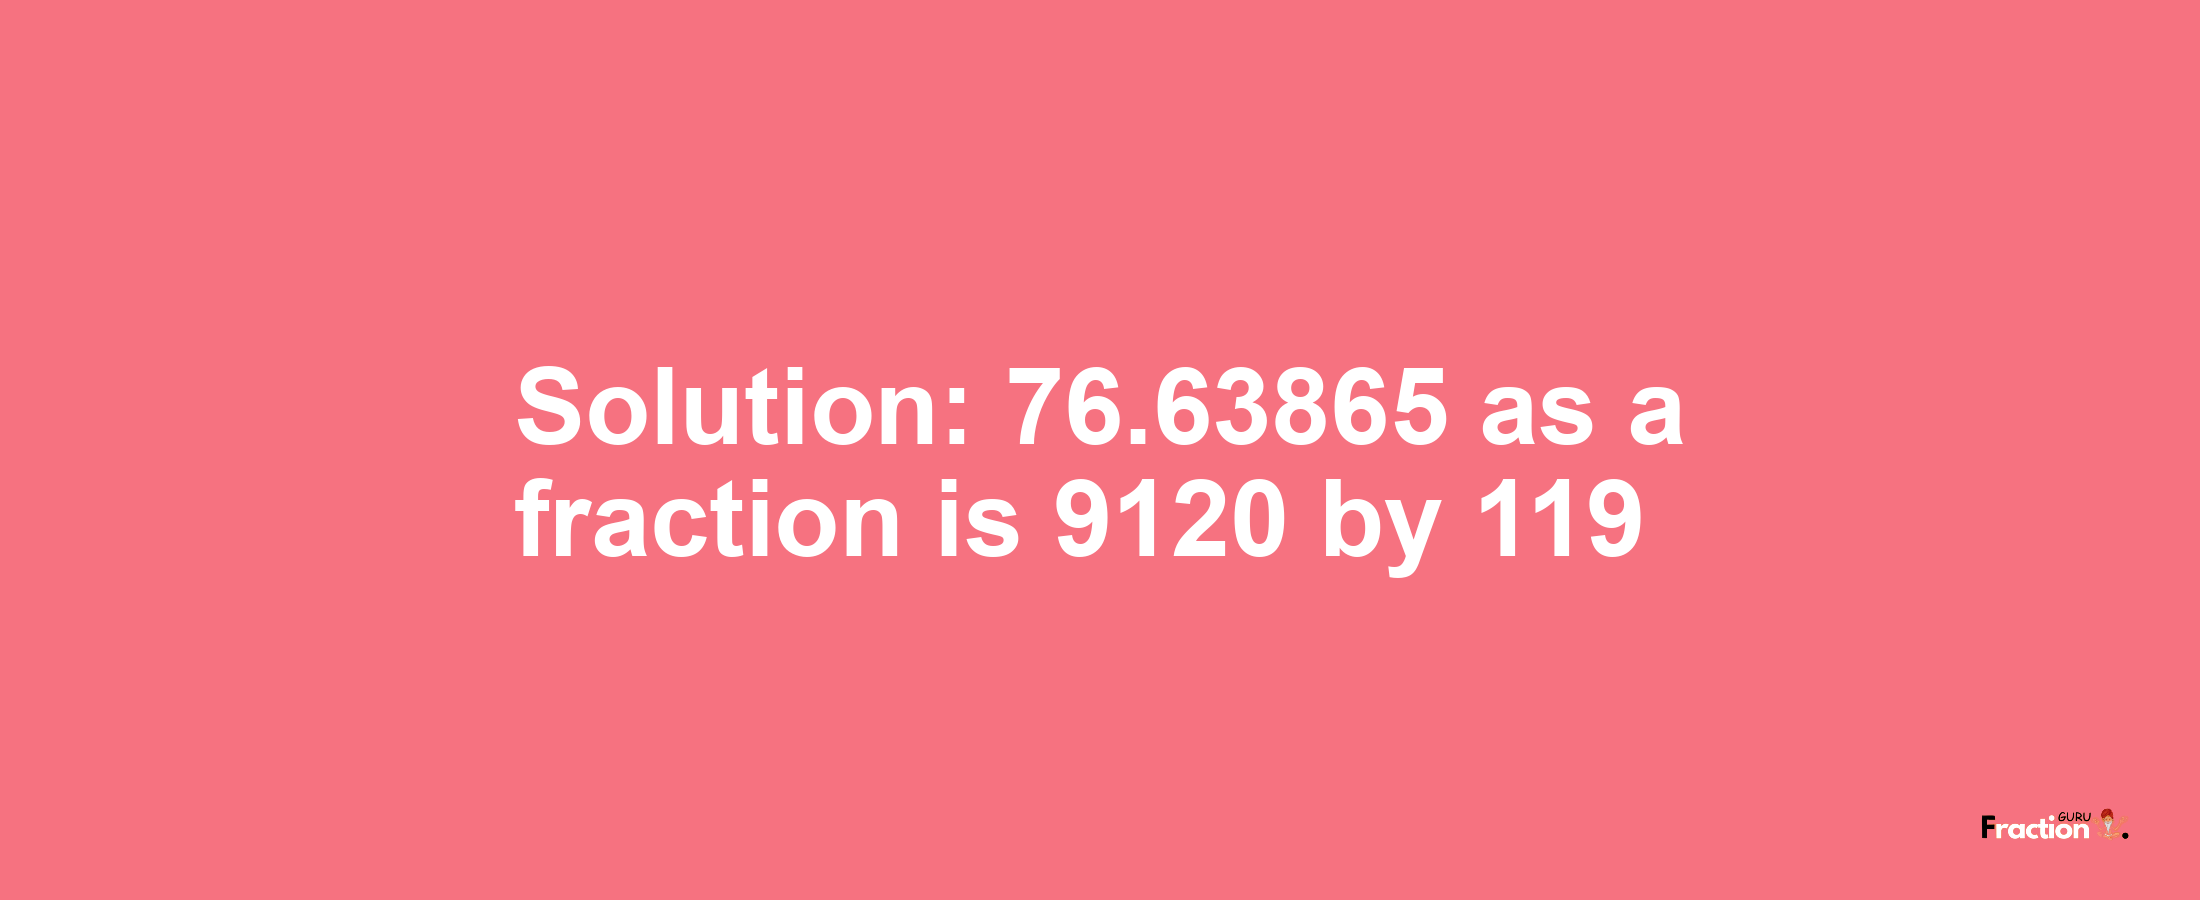 Solution:76.63865 as a fraction is 9120/119